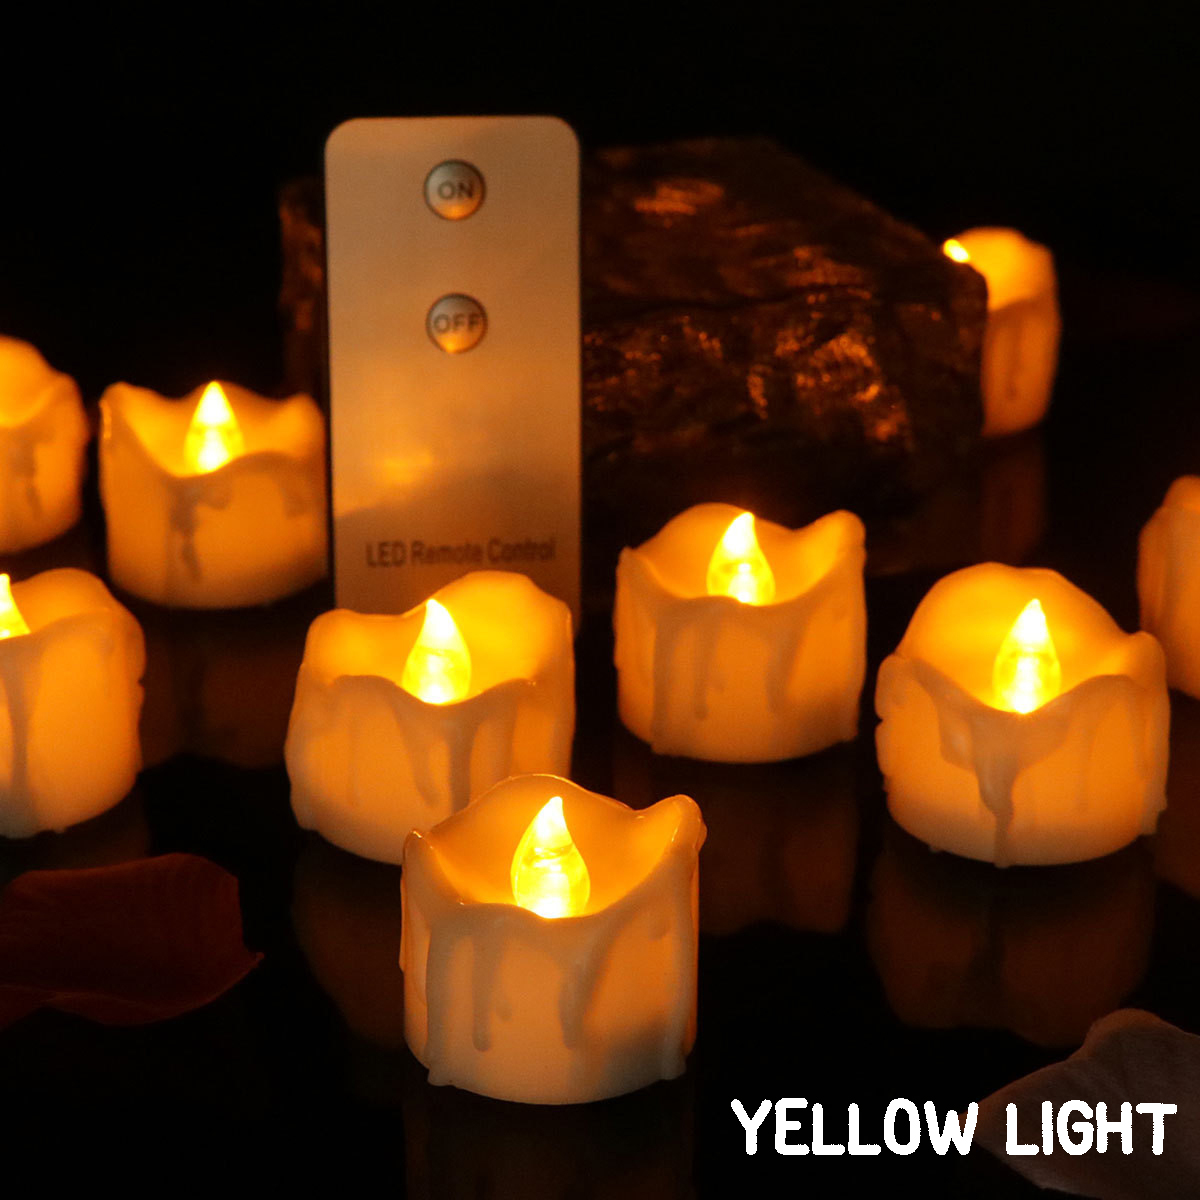 12PCS-LED-Flickering-Candle-Tea-Light-With-Remote-Control-for-Home-Garden-Balcony-Decor-1557823-4